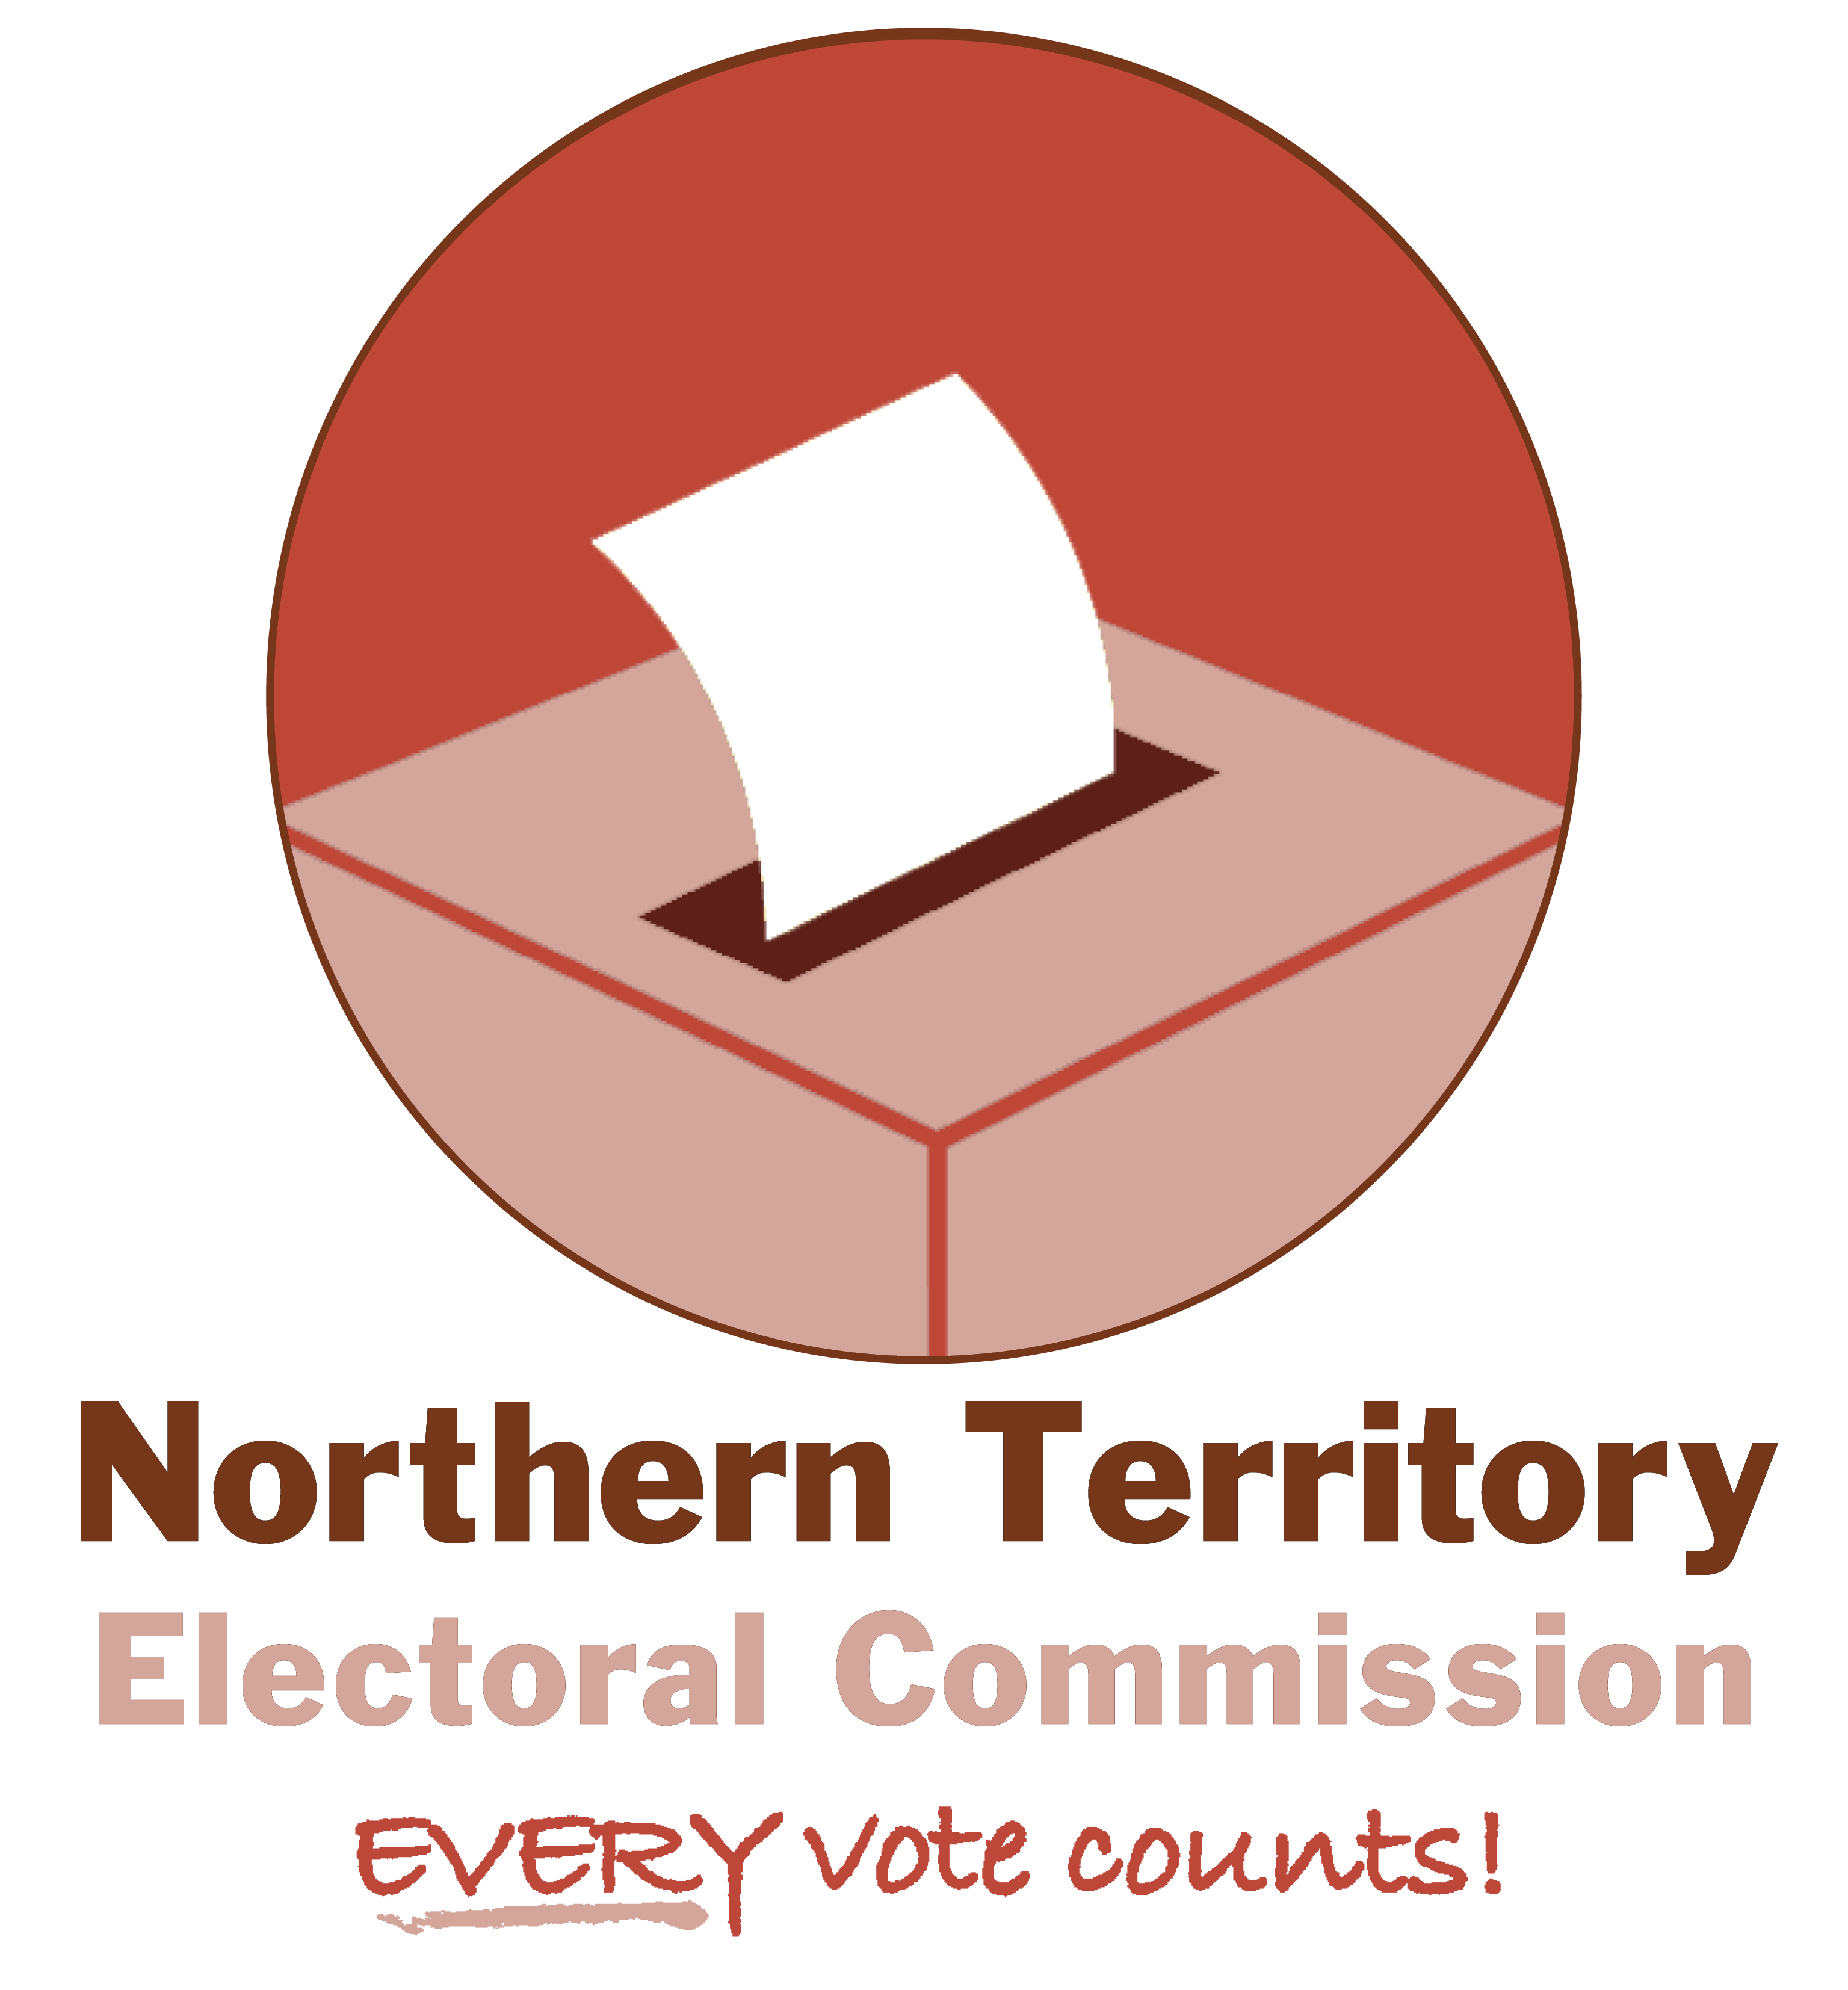 Northern Territory Electoral Commission